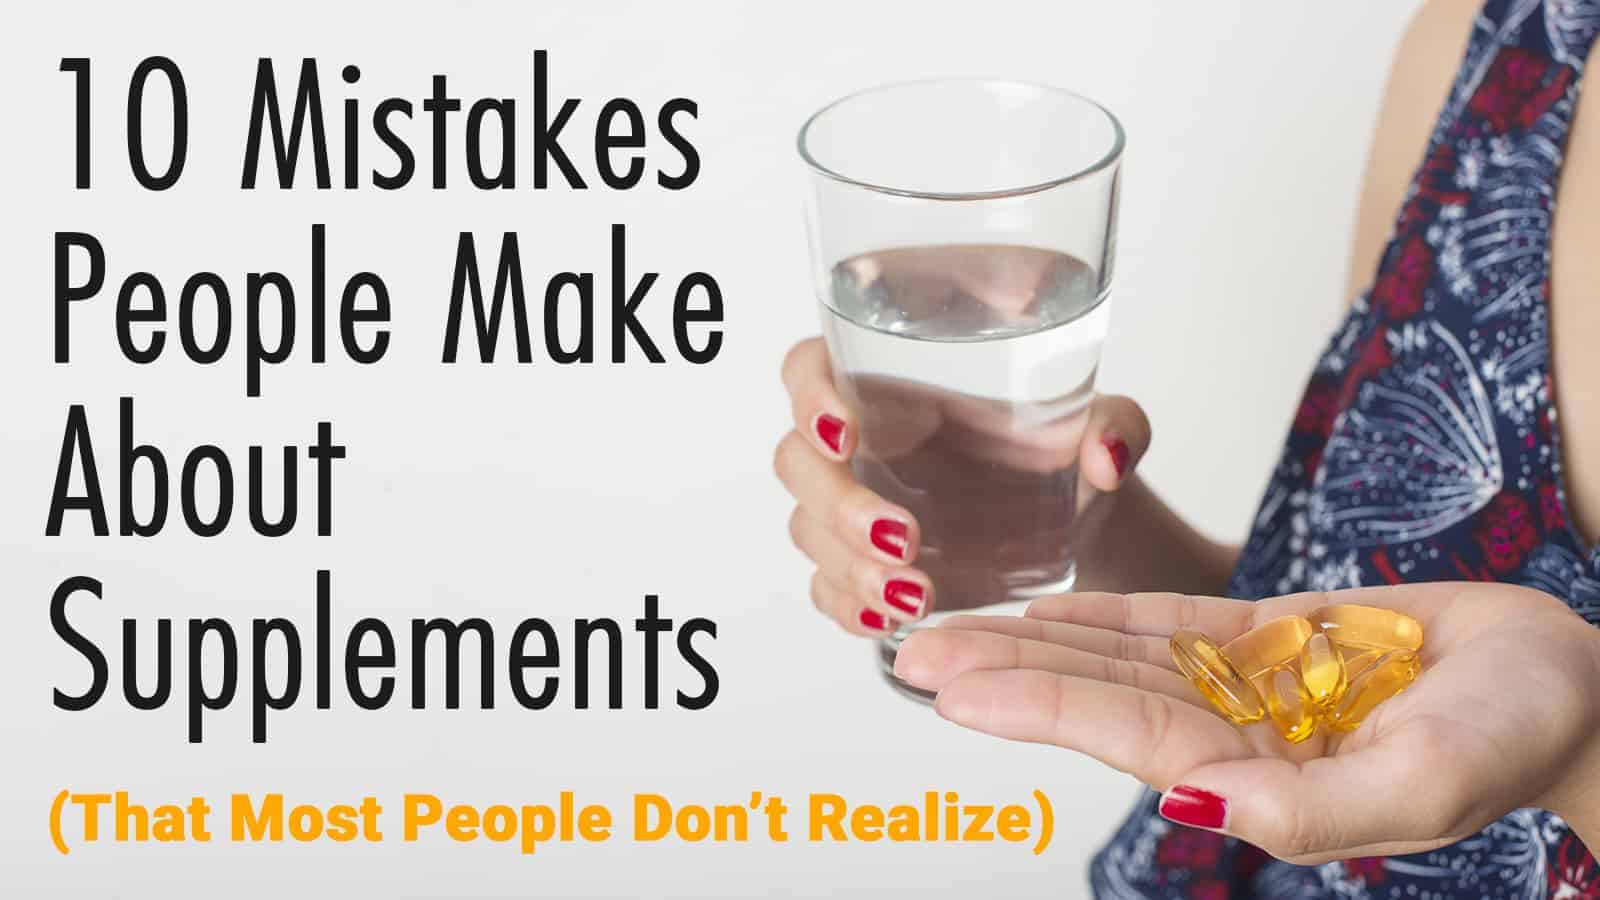 10 Mistakes People Make About Supplements (That Most People Don’t Realize)